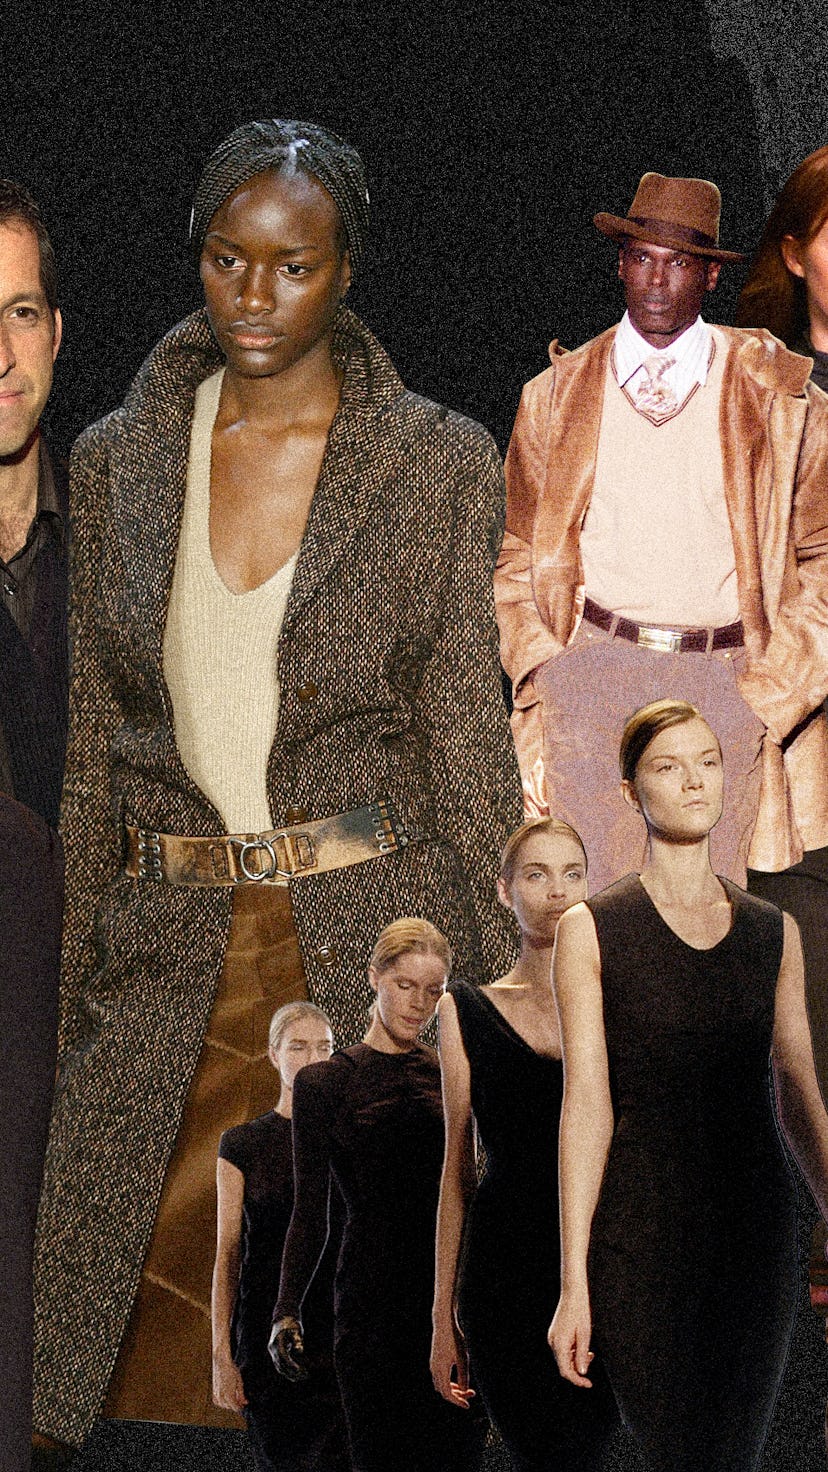 On 9/11's anniversary, several New York designers open up about the Fall 2002 fashion collections th...